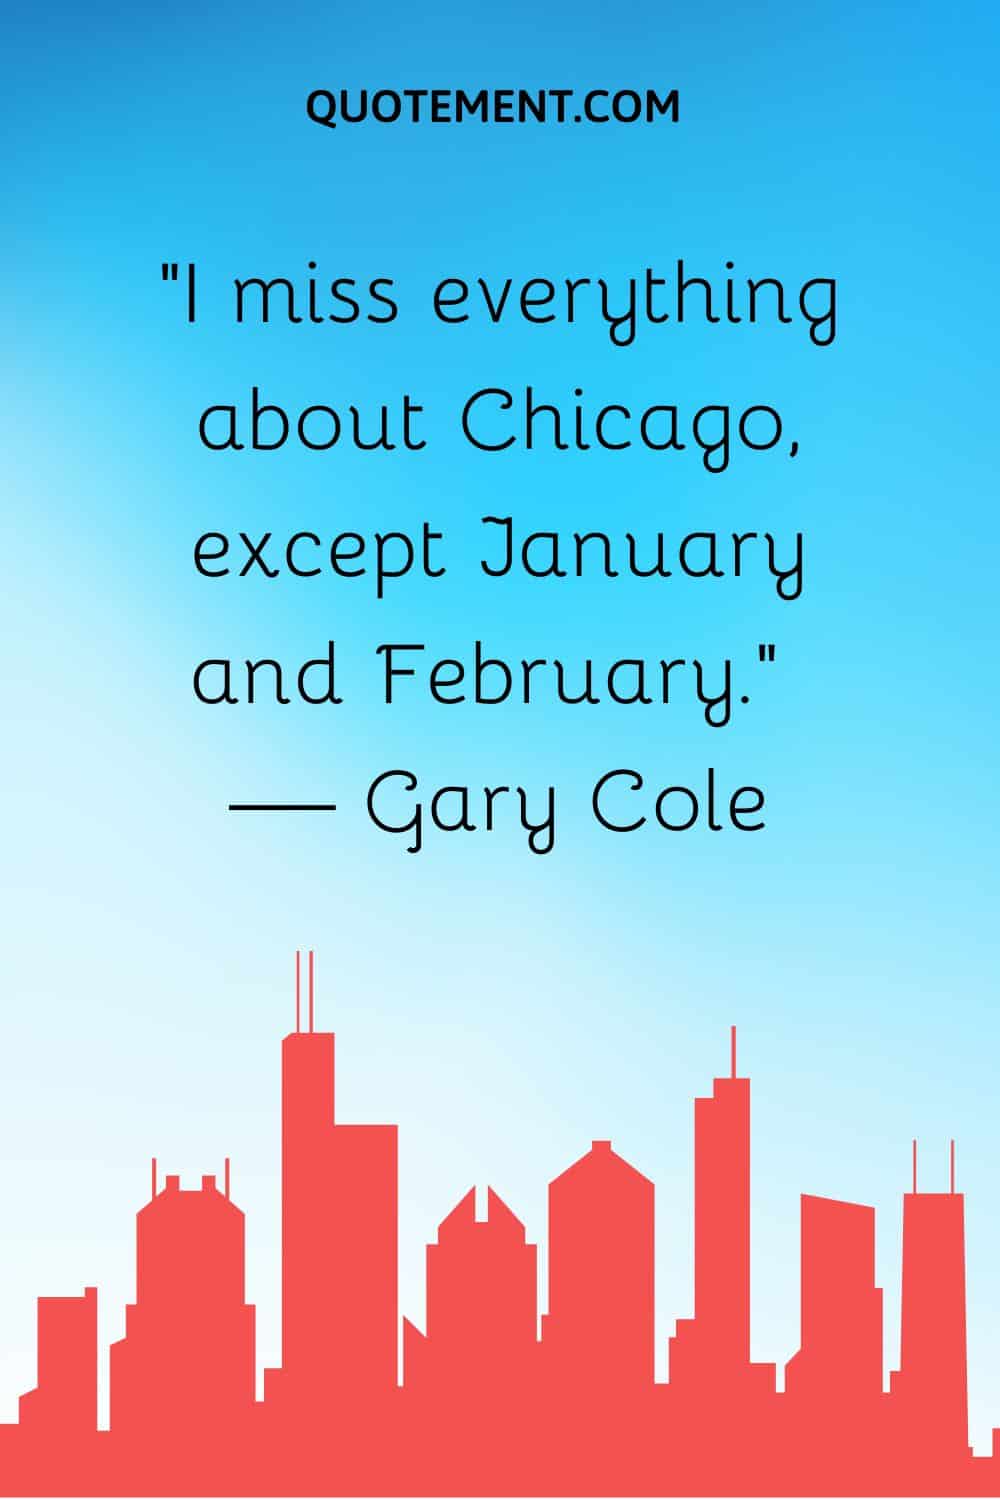 “I miss everything about Chicago, except January and February.” — Gary Cole